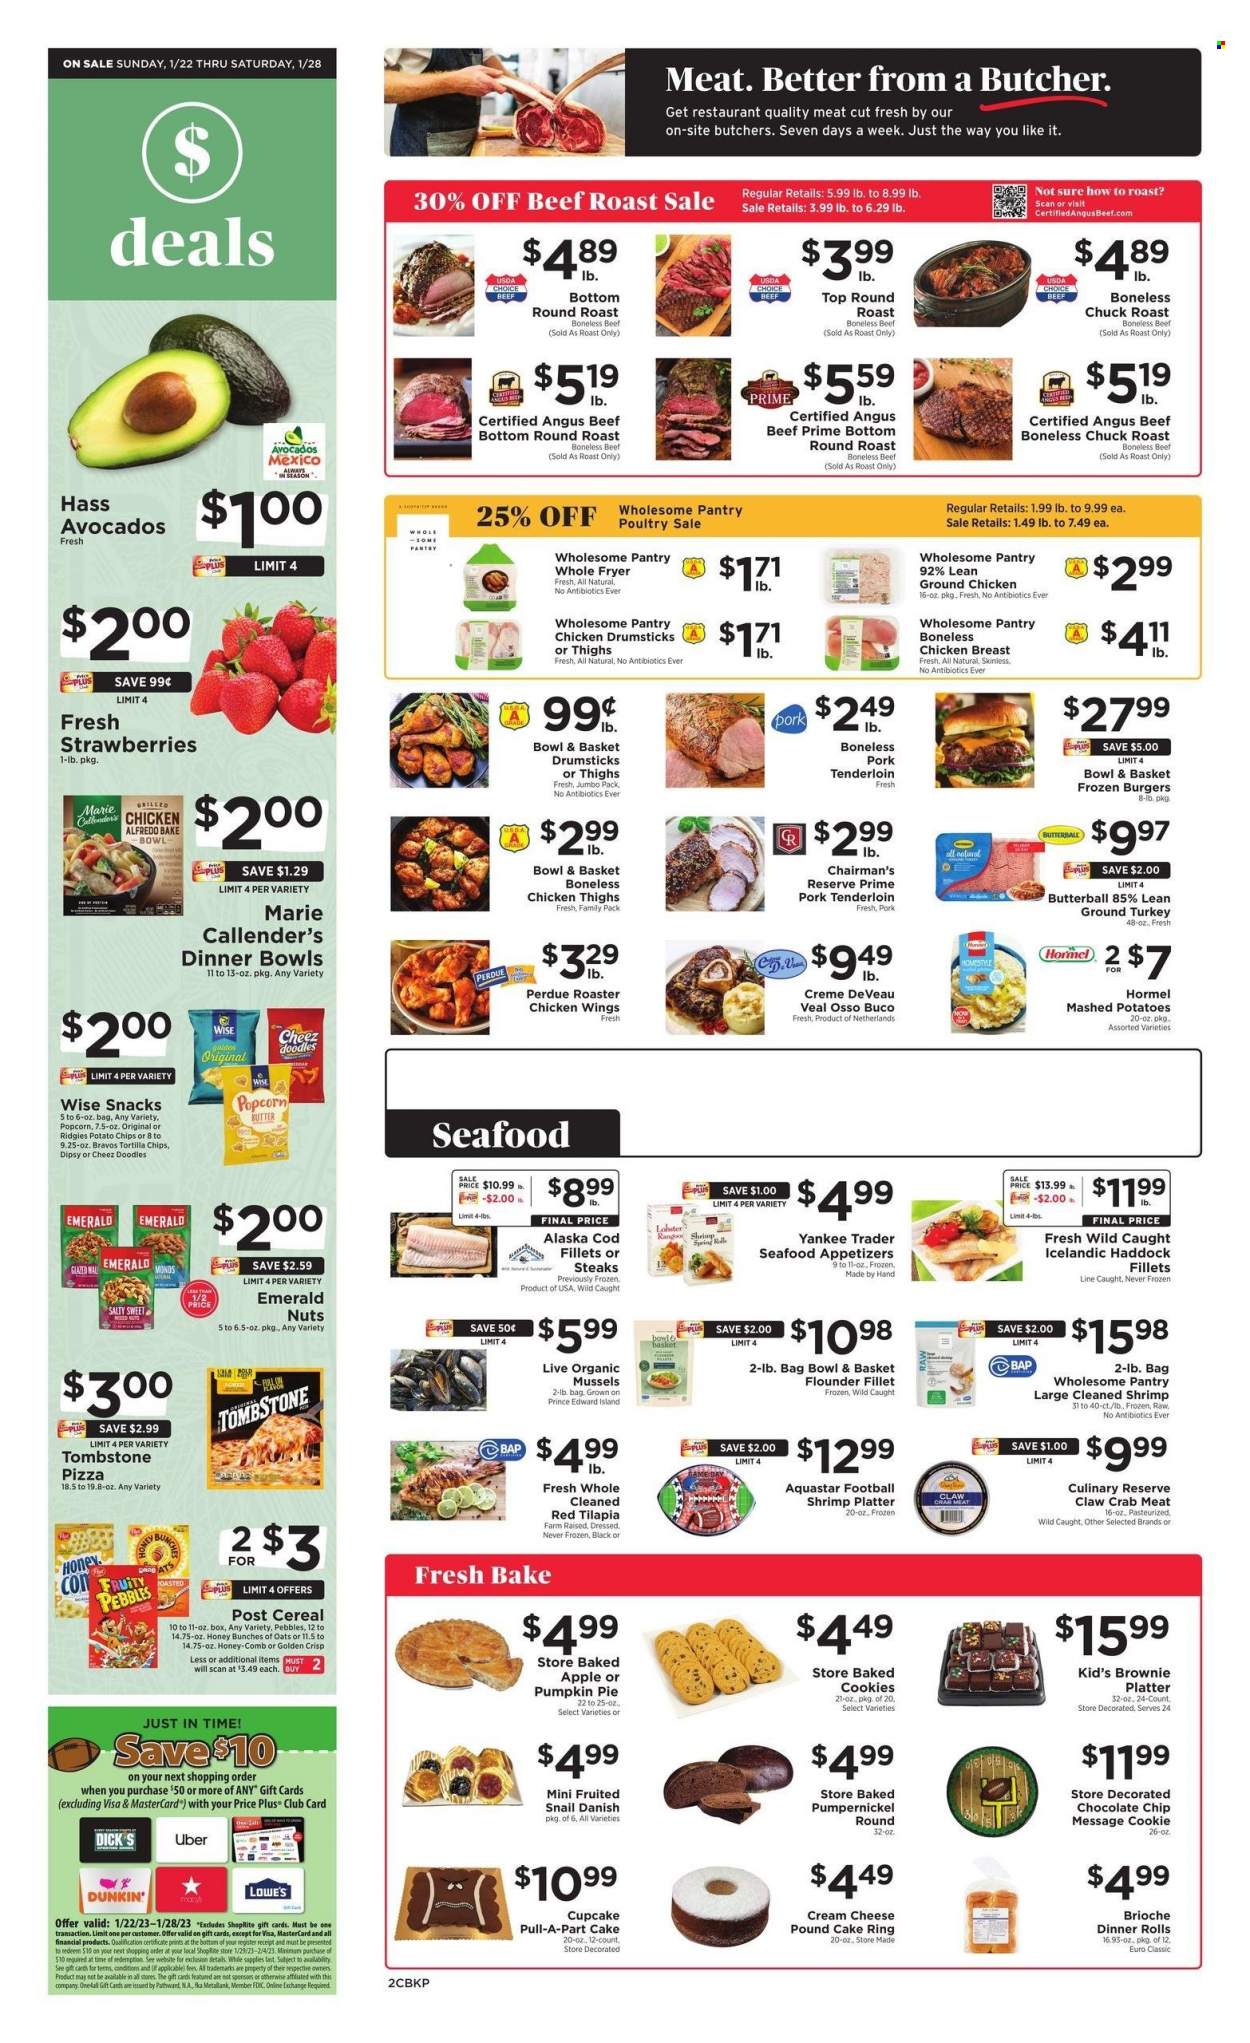 thumbnail - ShopRite Flyer - 01/22/2023 - 01/28/2023 - Sales products - cake, dinner rolls, brioche, Bowl & Basket, cupcake, brownies, pound cake, avocado, strawberries, cod, crab meat, flounder, lobster, mussels, tilapia, haddock, seafood, crab, shrimps, mashed potatoes, pizza, hamburger, Perdue®, Marie Callender's, Hormel, Butterball, cream cheese, chicken wings, cookies, snack, tortilla chips, potato chips, popcorn, cereals, Fruity Pebbles, ground chicken, ground turkey, chicken breasts, chicken thighs, chicken drumsticks, beef meat, steak, round roast, roast beef, chuck roast, pork meat, pork tenderloin, comb, Sure, cake form. Page 2.